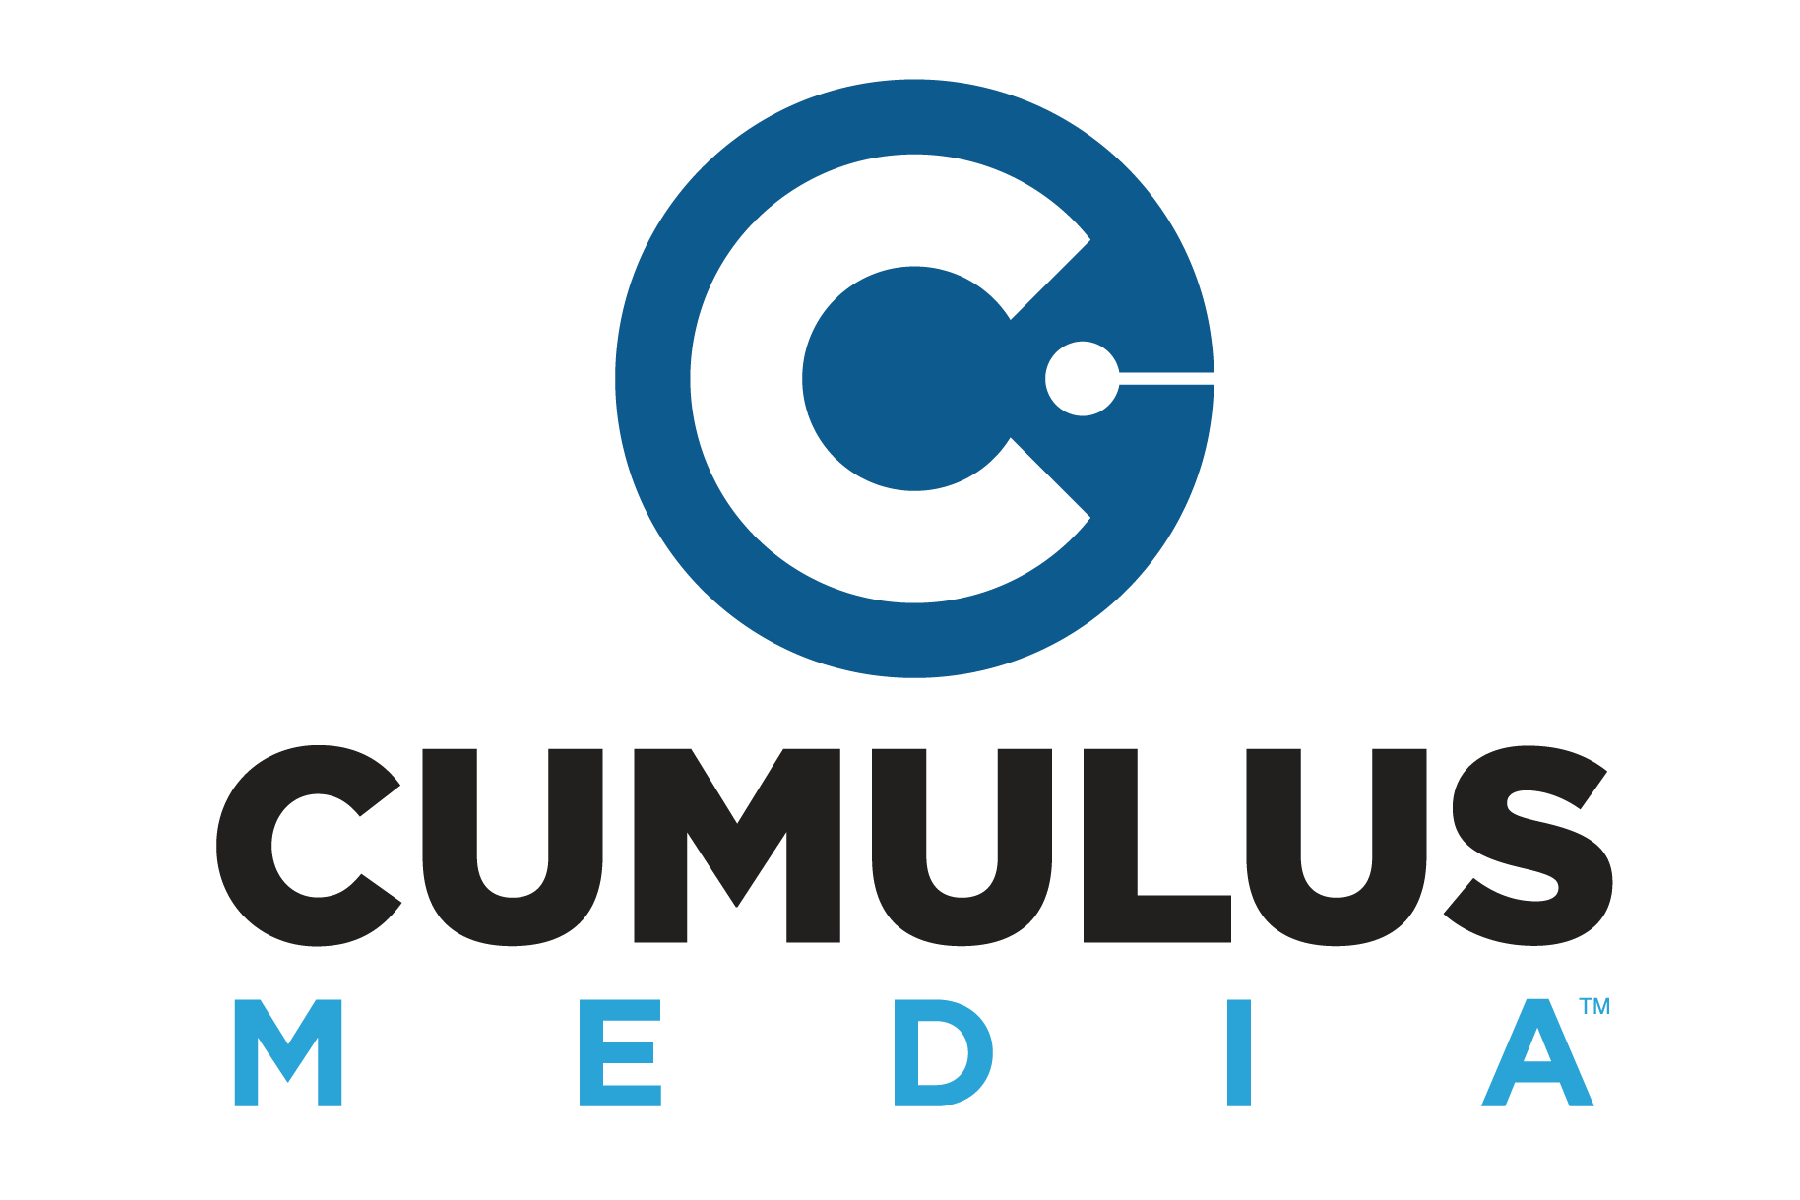 Cumulus Media's Westwood One Launches 37th Consecutive